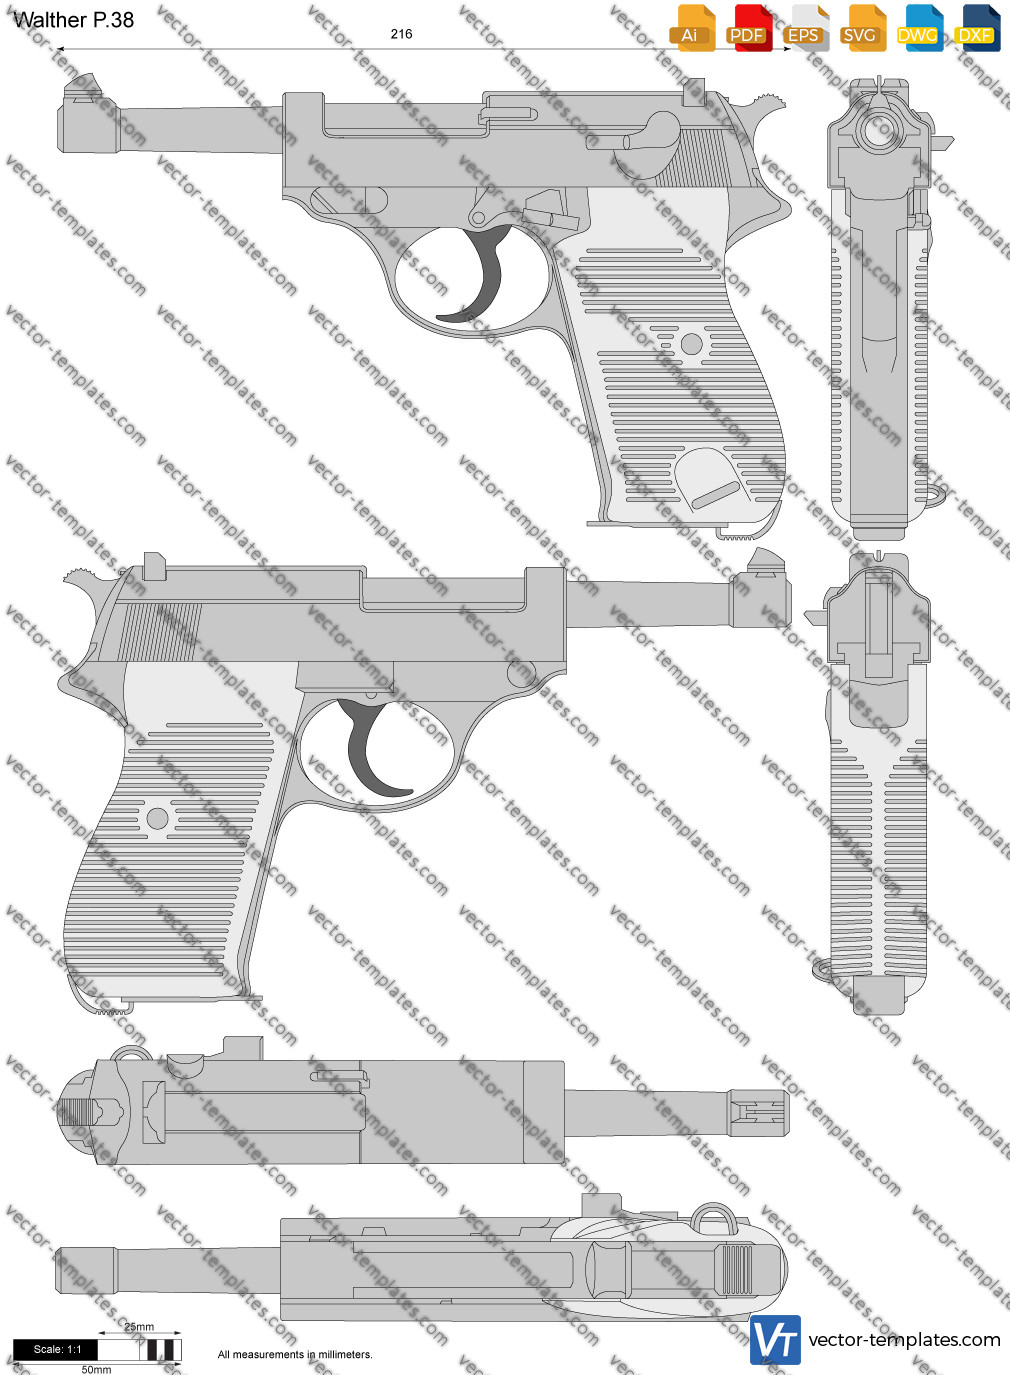 Templates - Weapons - Pistols - Walther P.38